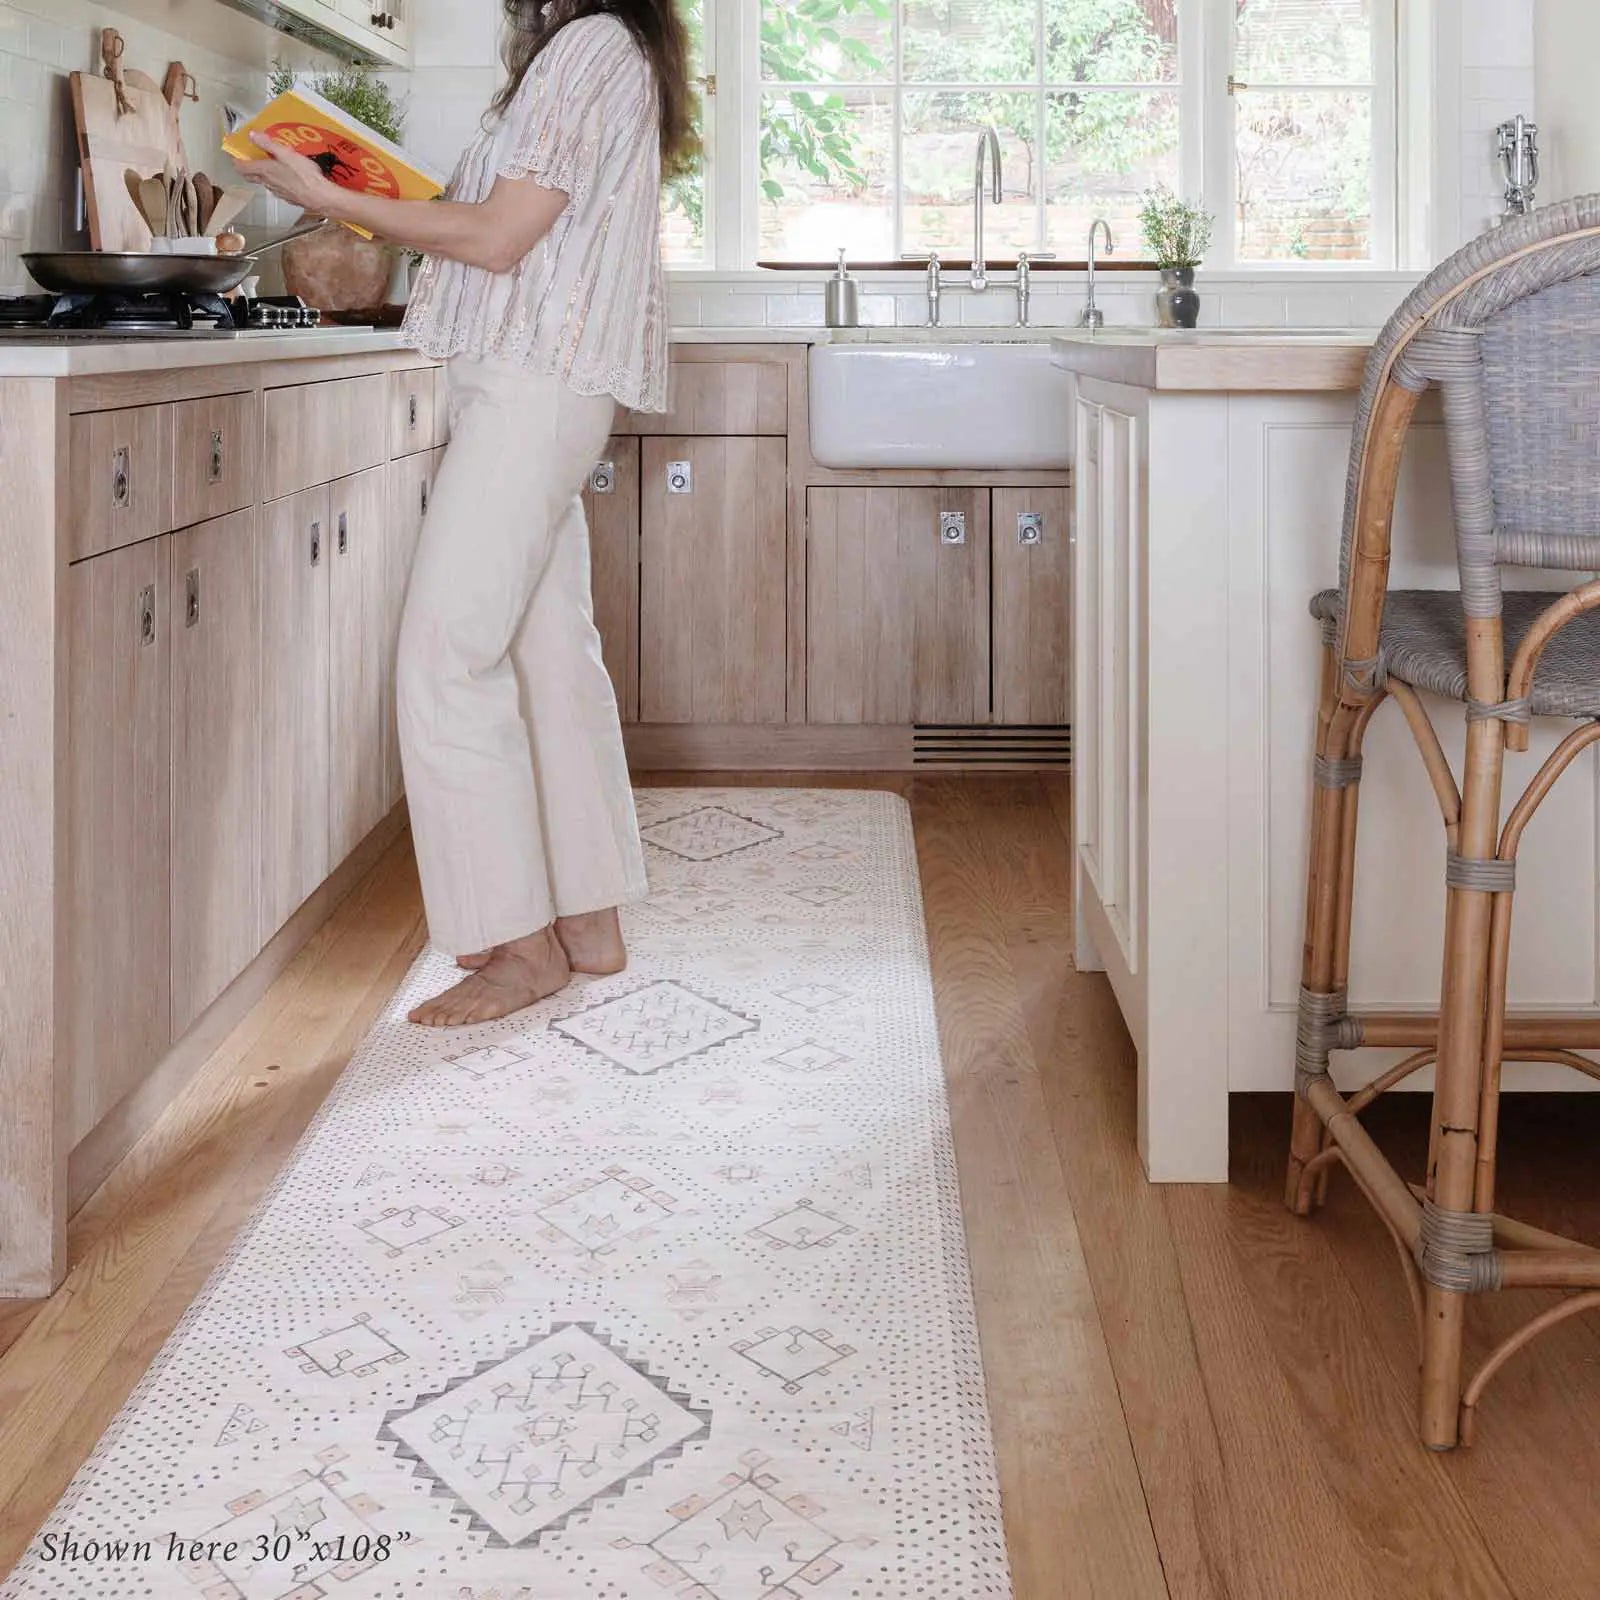 Neutral boho kitchen mat with woman cooking in kitchen on size 30x108